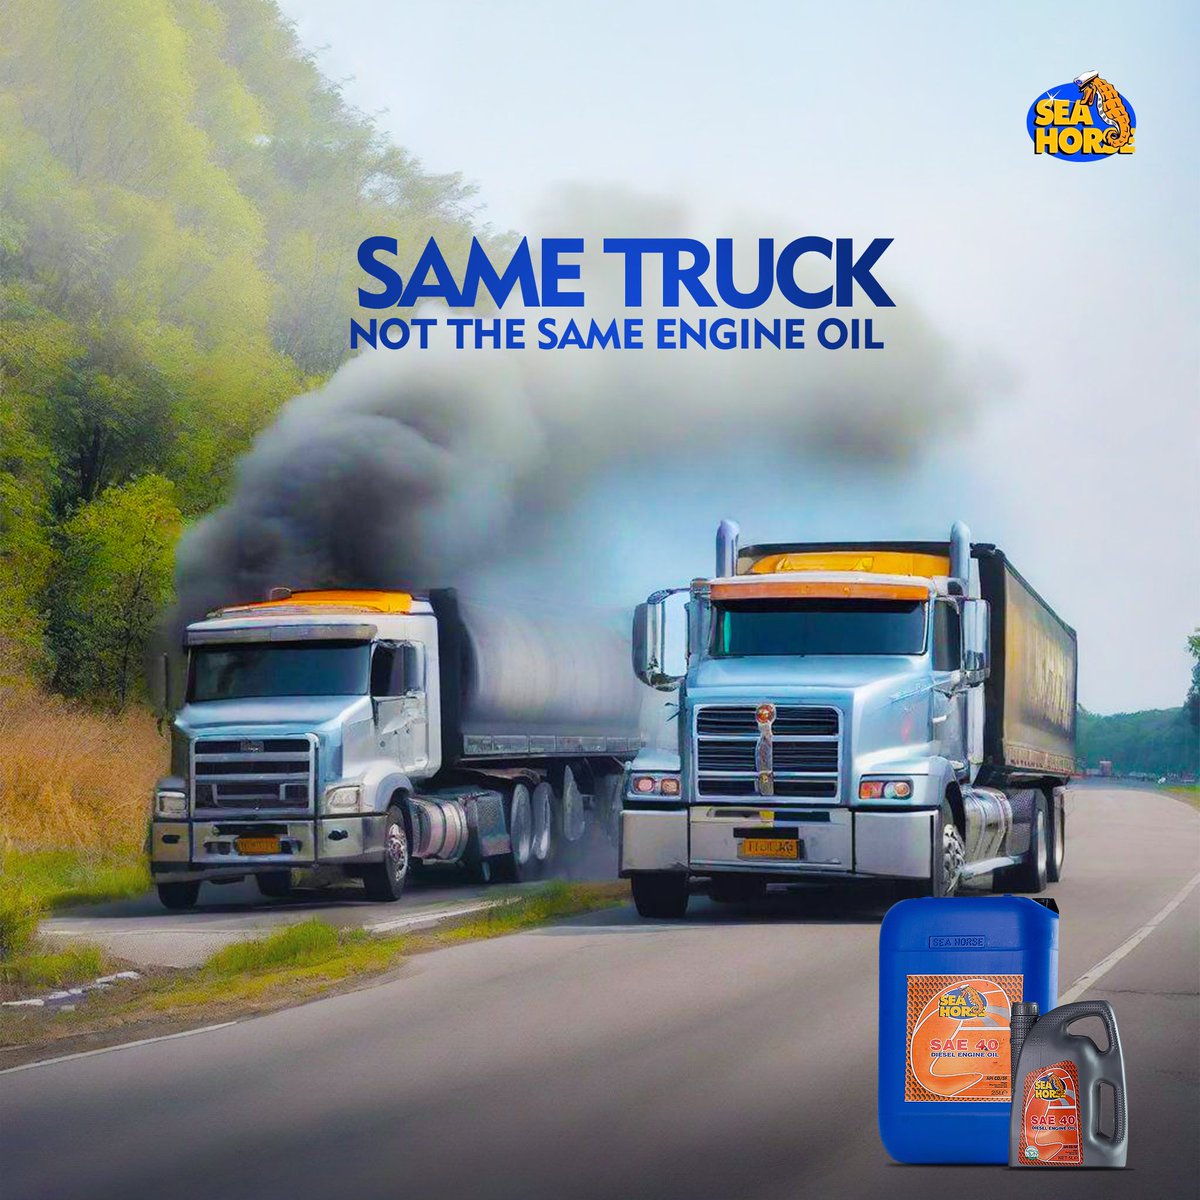 Transform your engine with the power of authentic engine oil. Elevate your driving experience by choosing only the best lubricants.

#MotorOil #CarCare #Maintenance #MotorLubricants #EngineOil #QualityOil #SeaHorseLubricants #ThePowerOfYourDrive